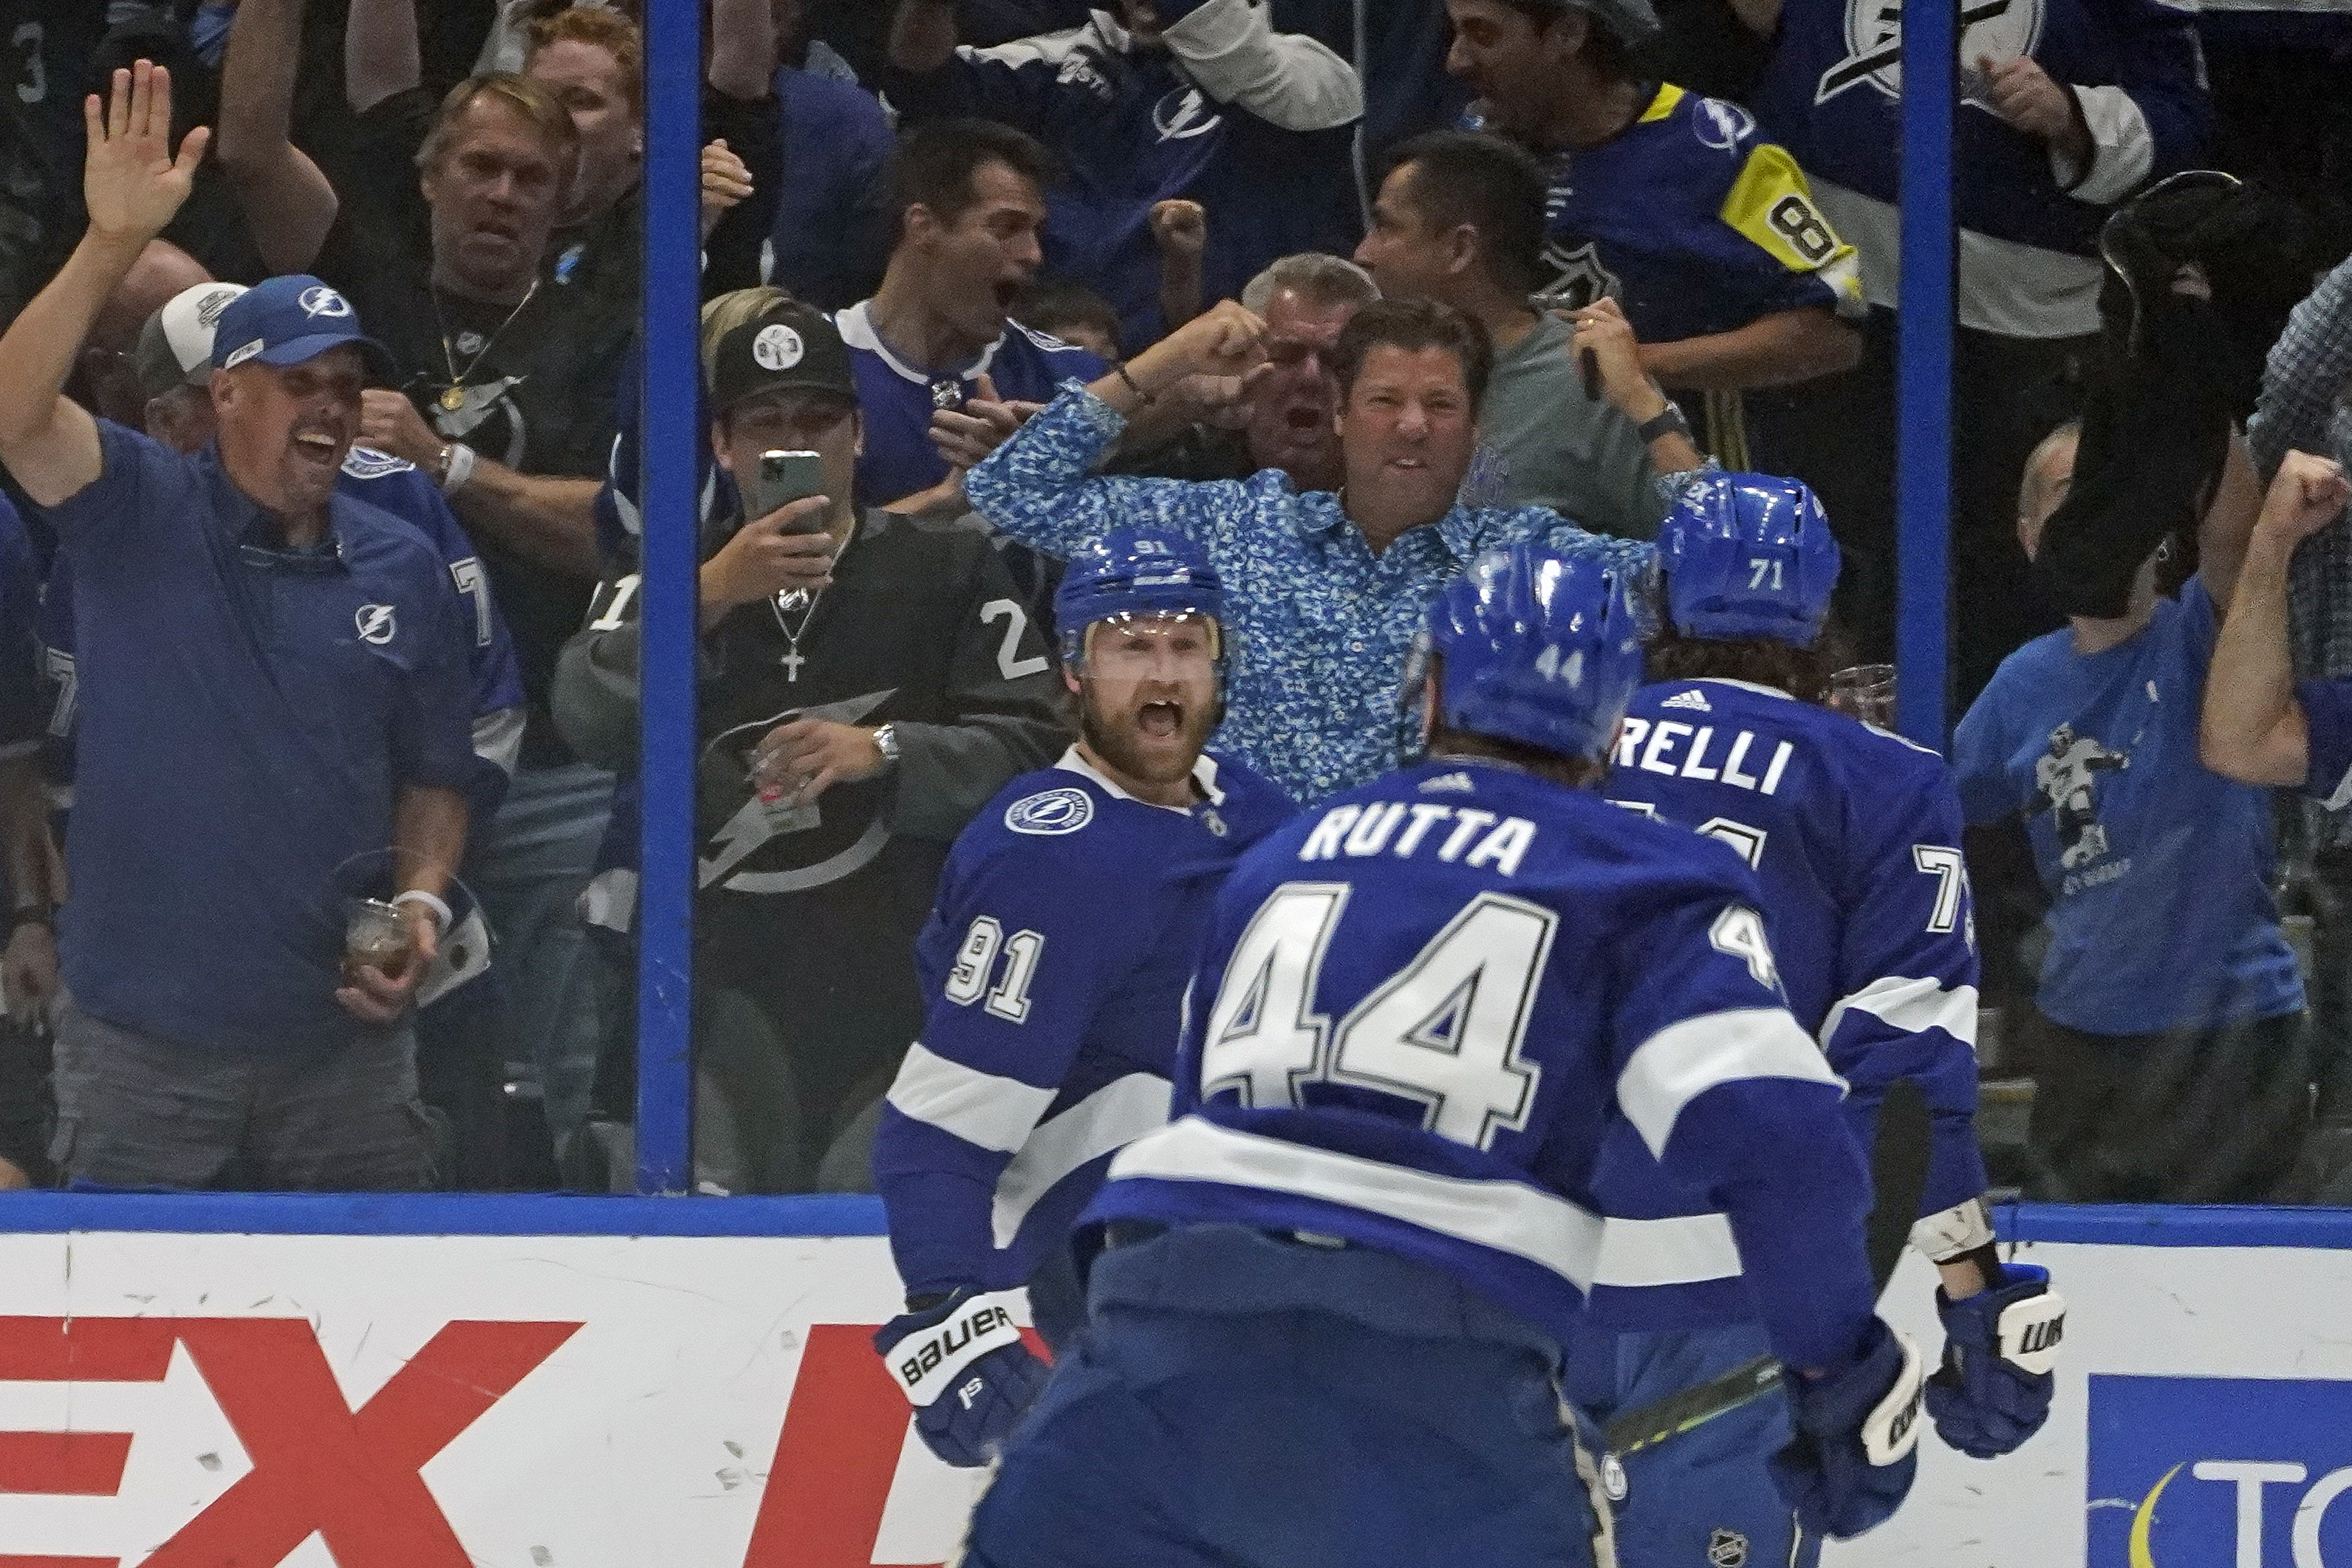 8 Things You Probably Didn't Know About The Ice at Amalie Arena